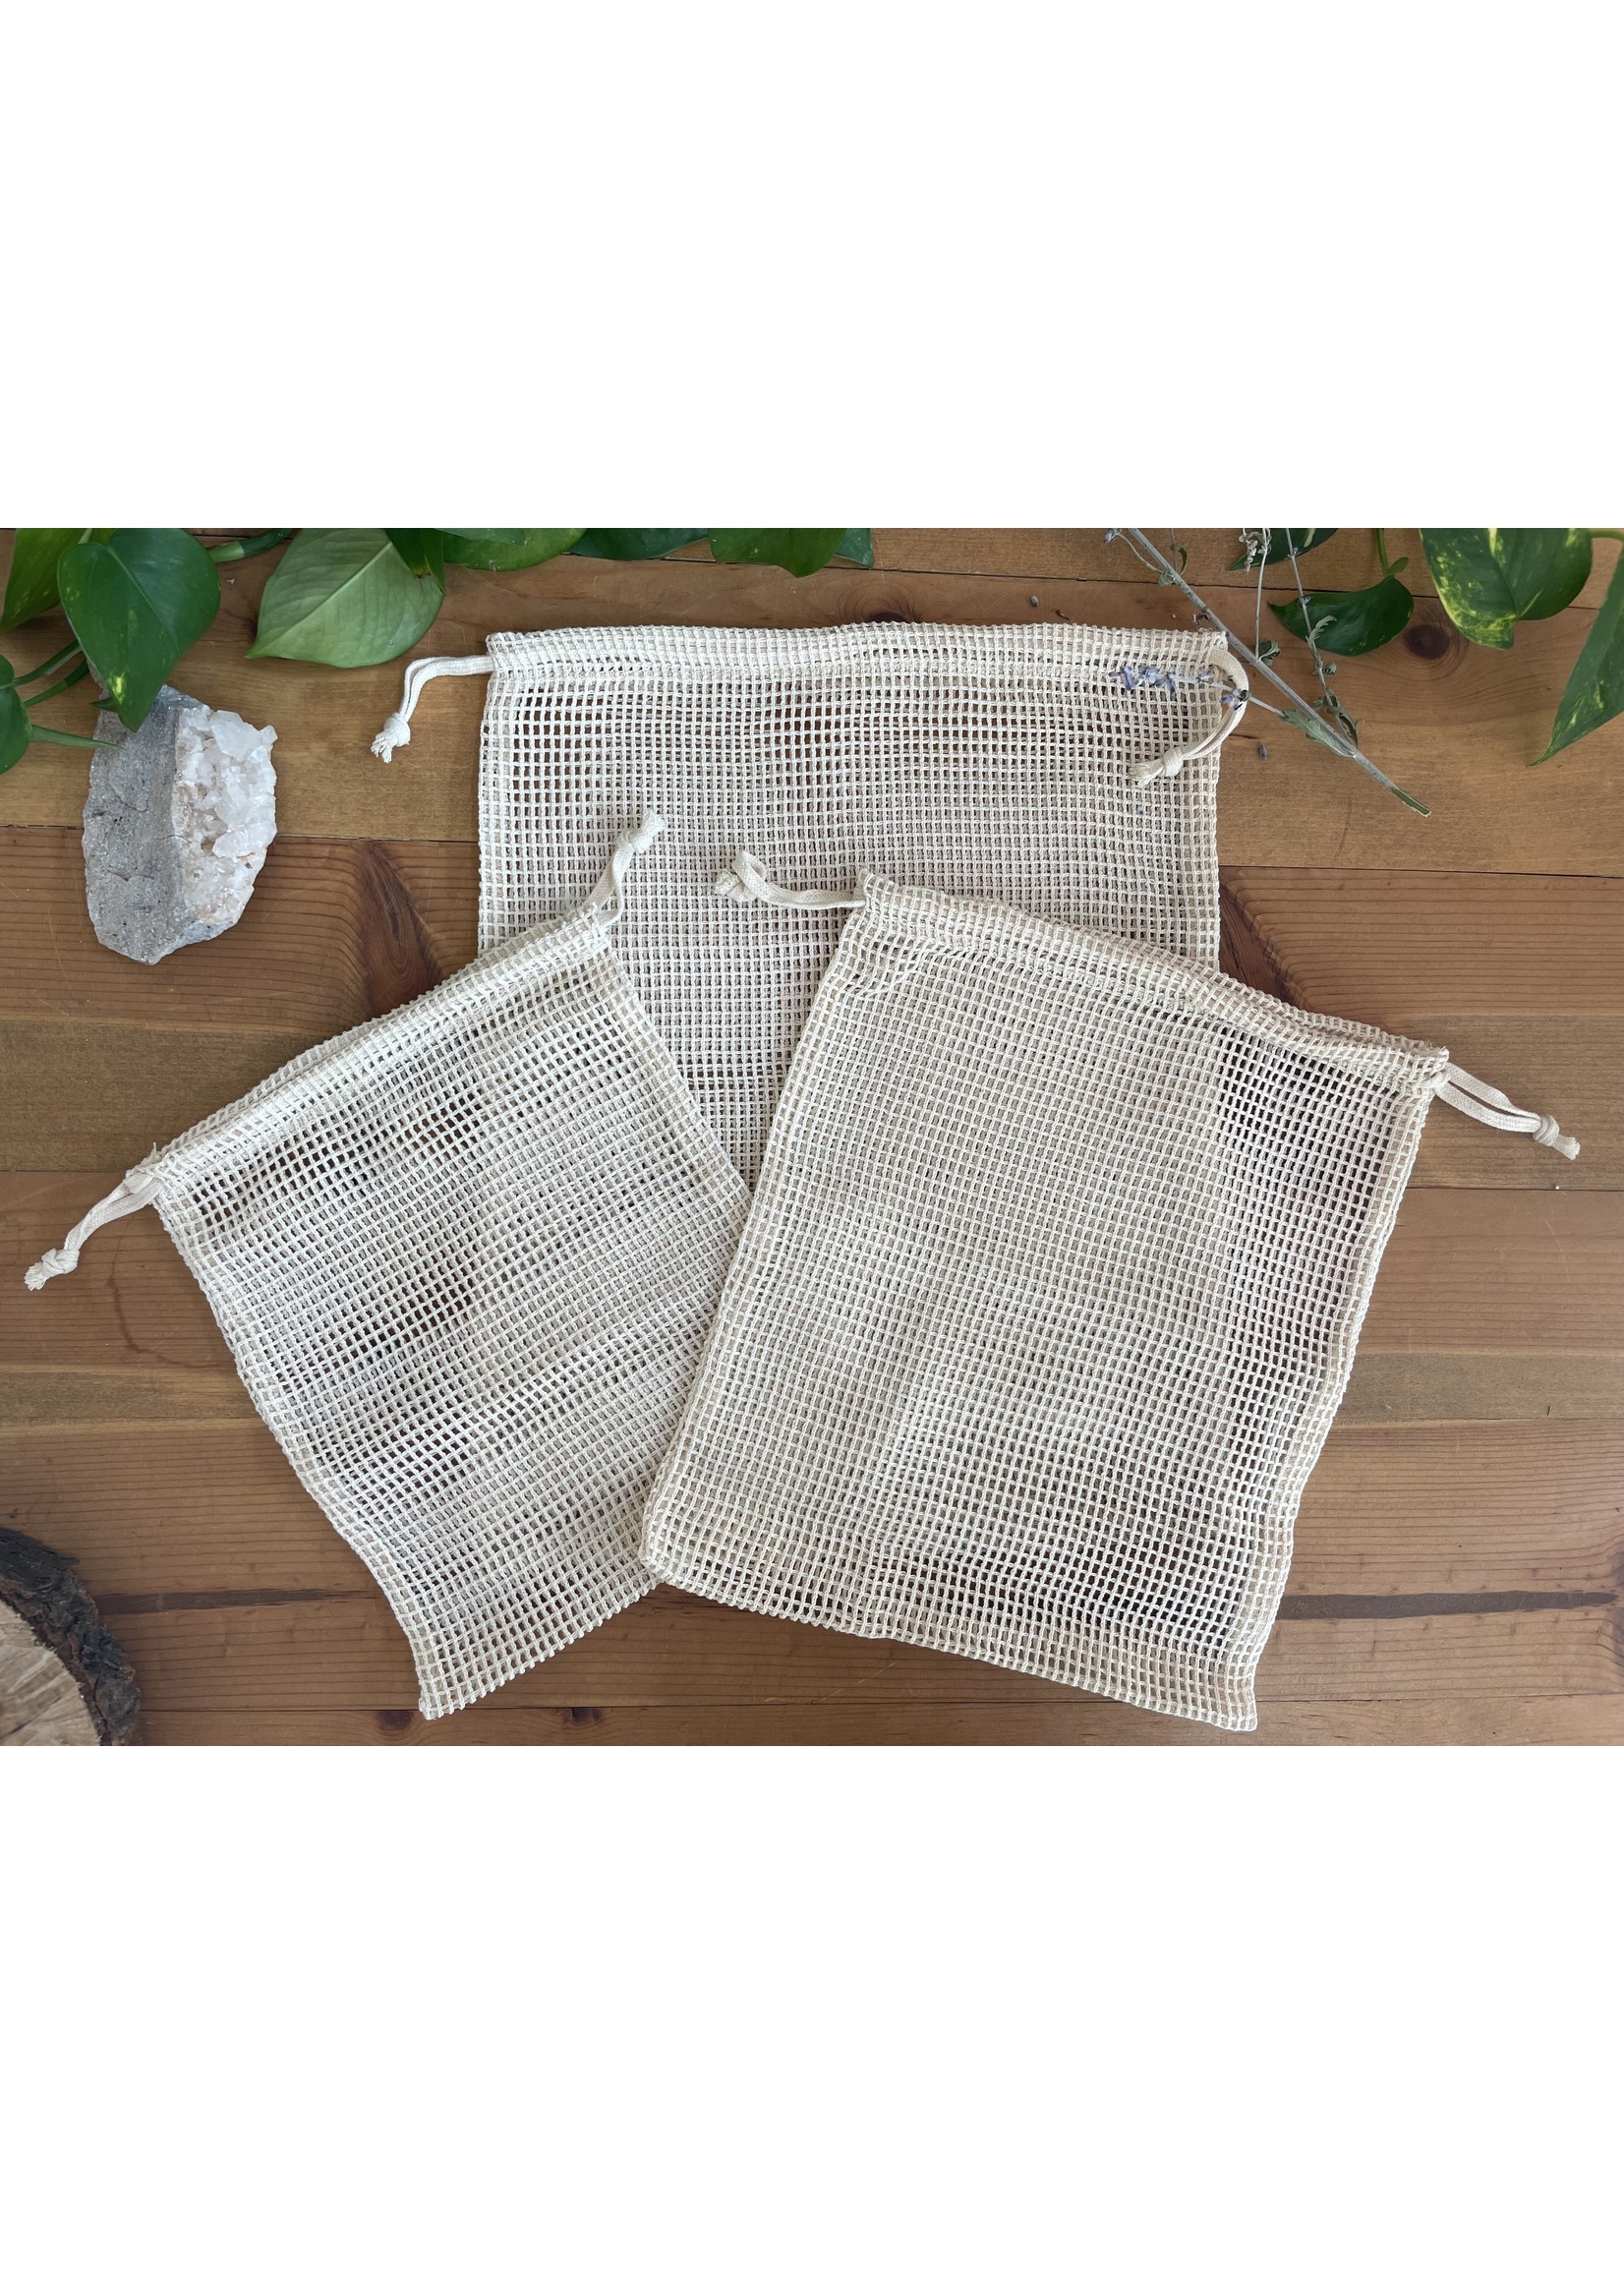 Tangled Up In Hue Produce Bag - 3 pack - 100% Cotton